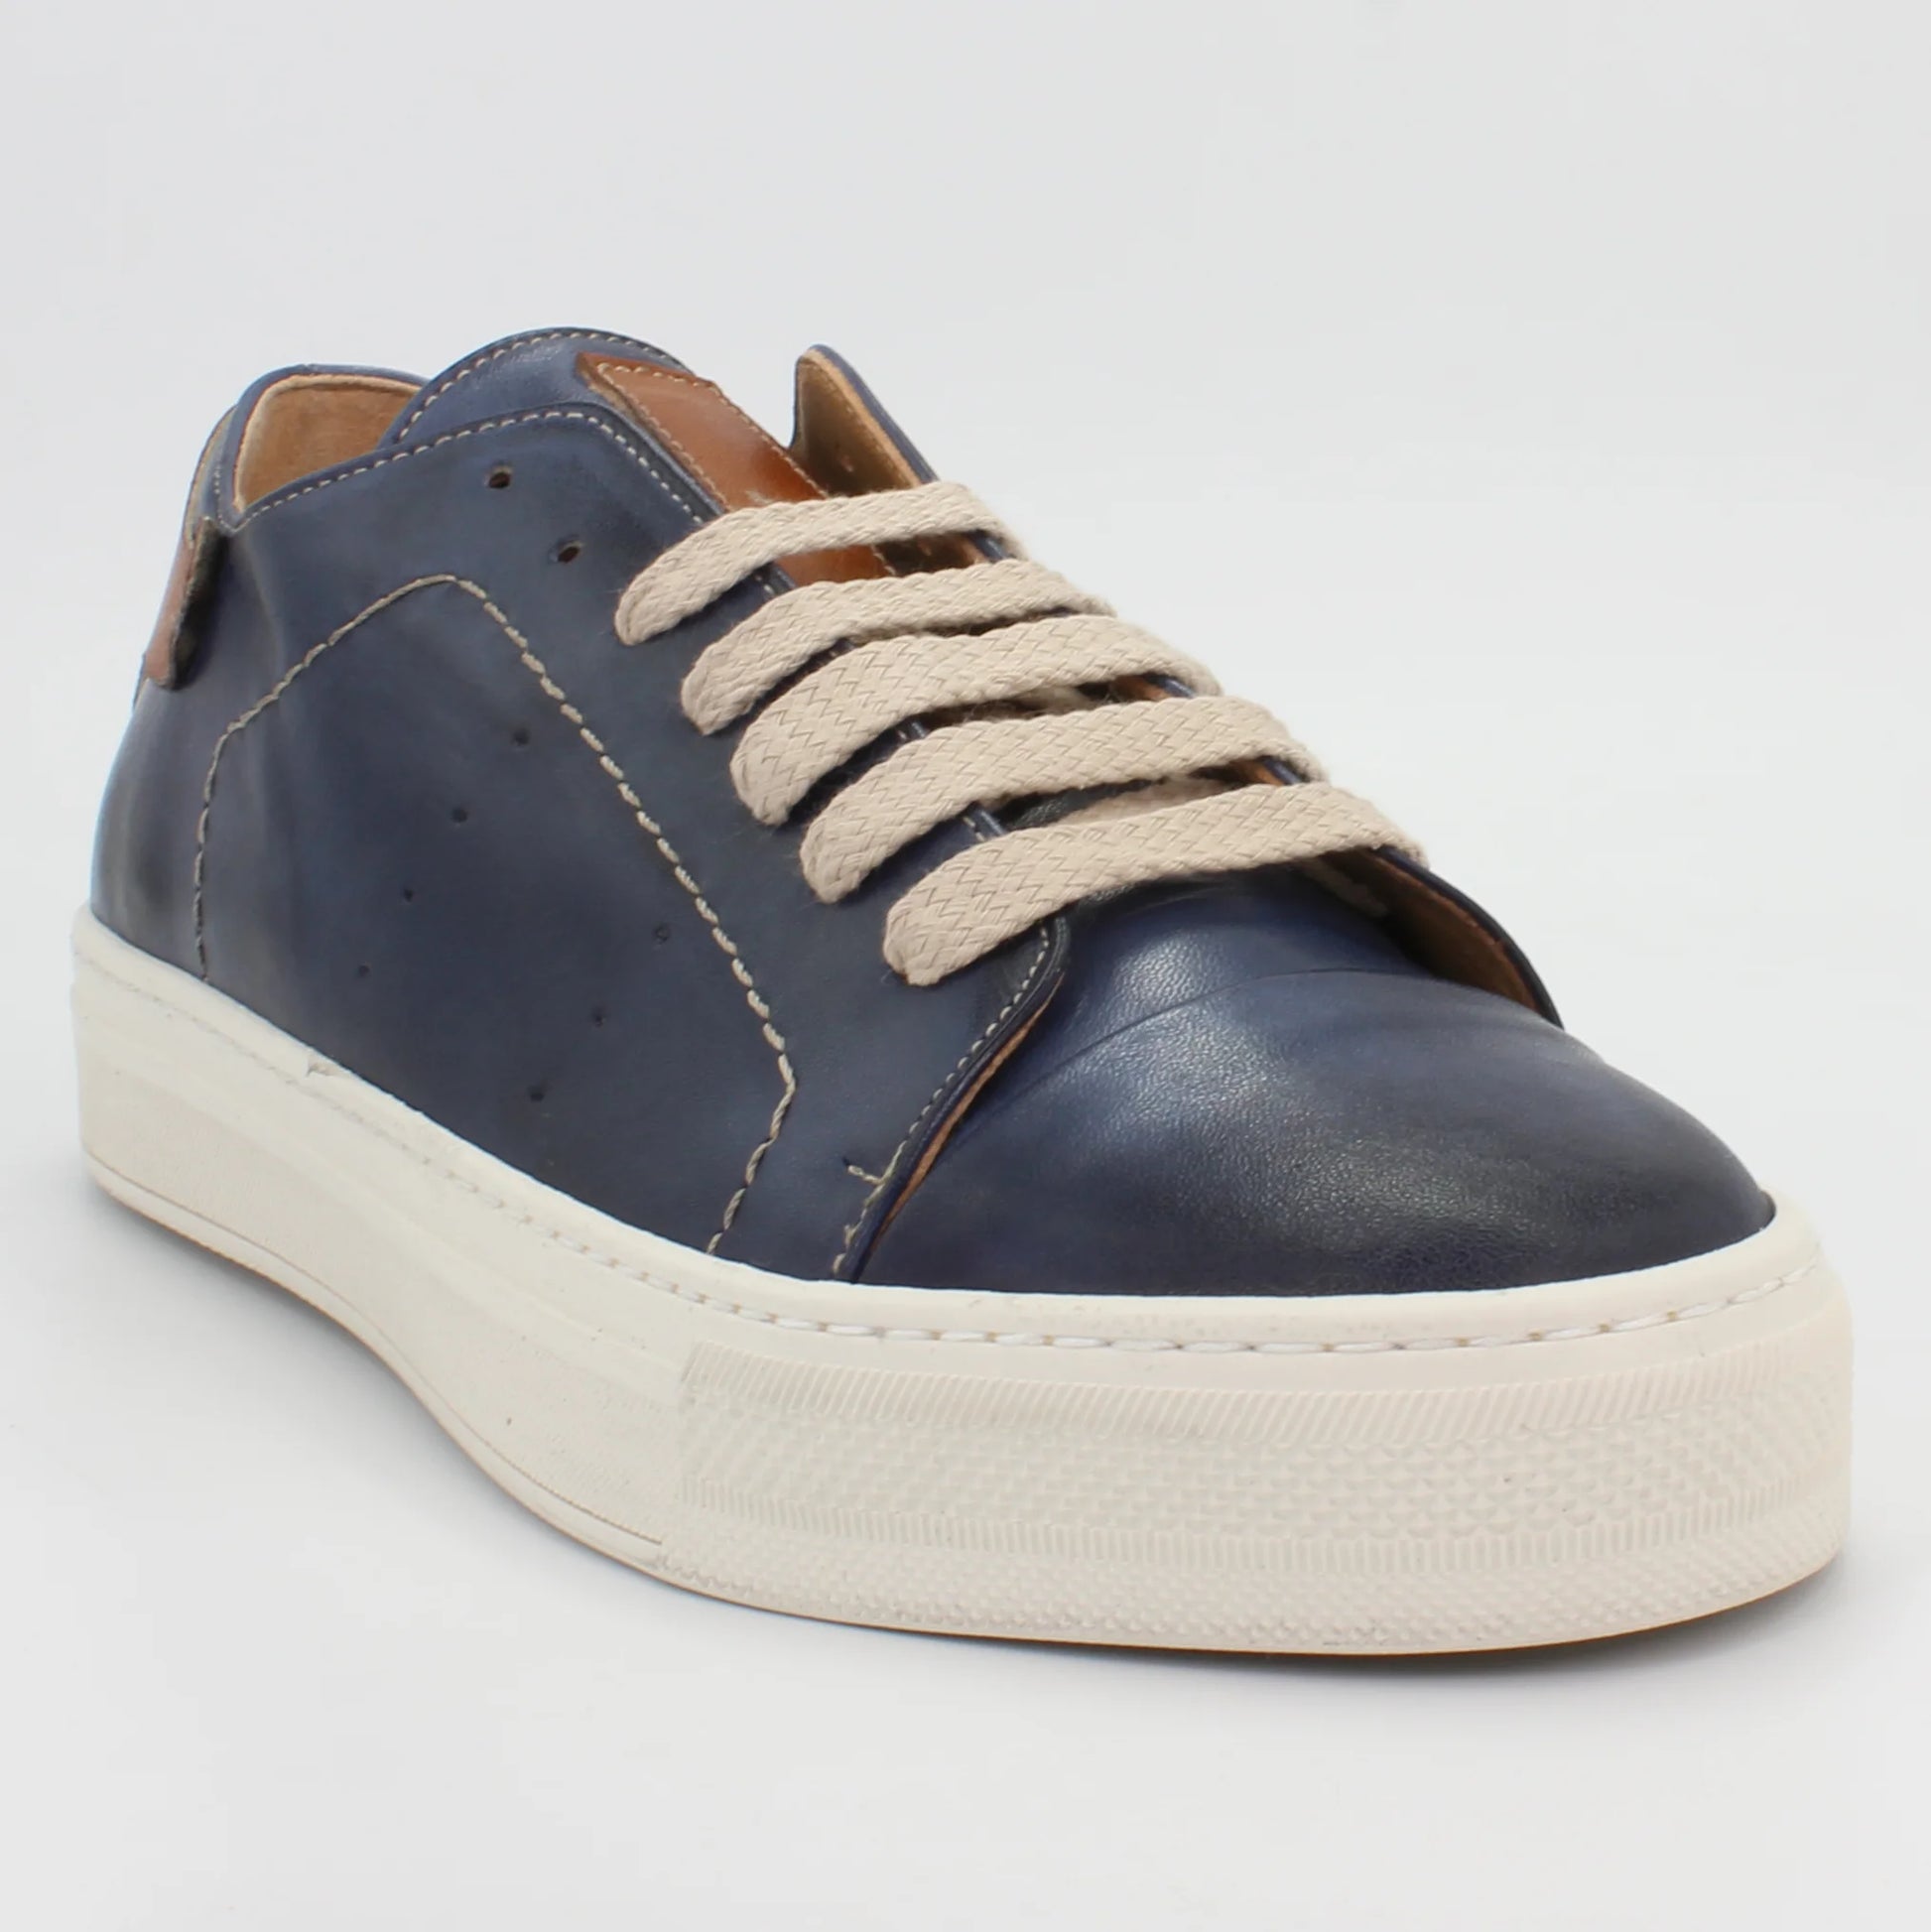 Shop Handmade Italian Leather sneaker in blue (GRWILM-3) or browse our range of hand-made Italian shoes for men in leather or suede in-store at Aliverti Cape Town, or shop online. We deliver in South Africa & offer multiple payment plans as well as accept multiple safe & secure payment methods.